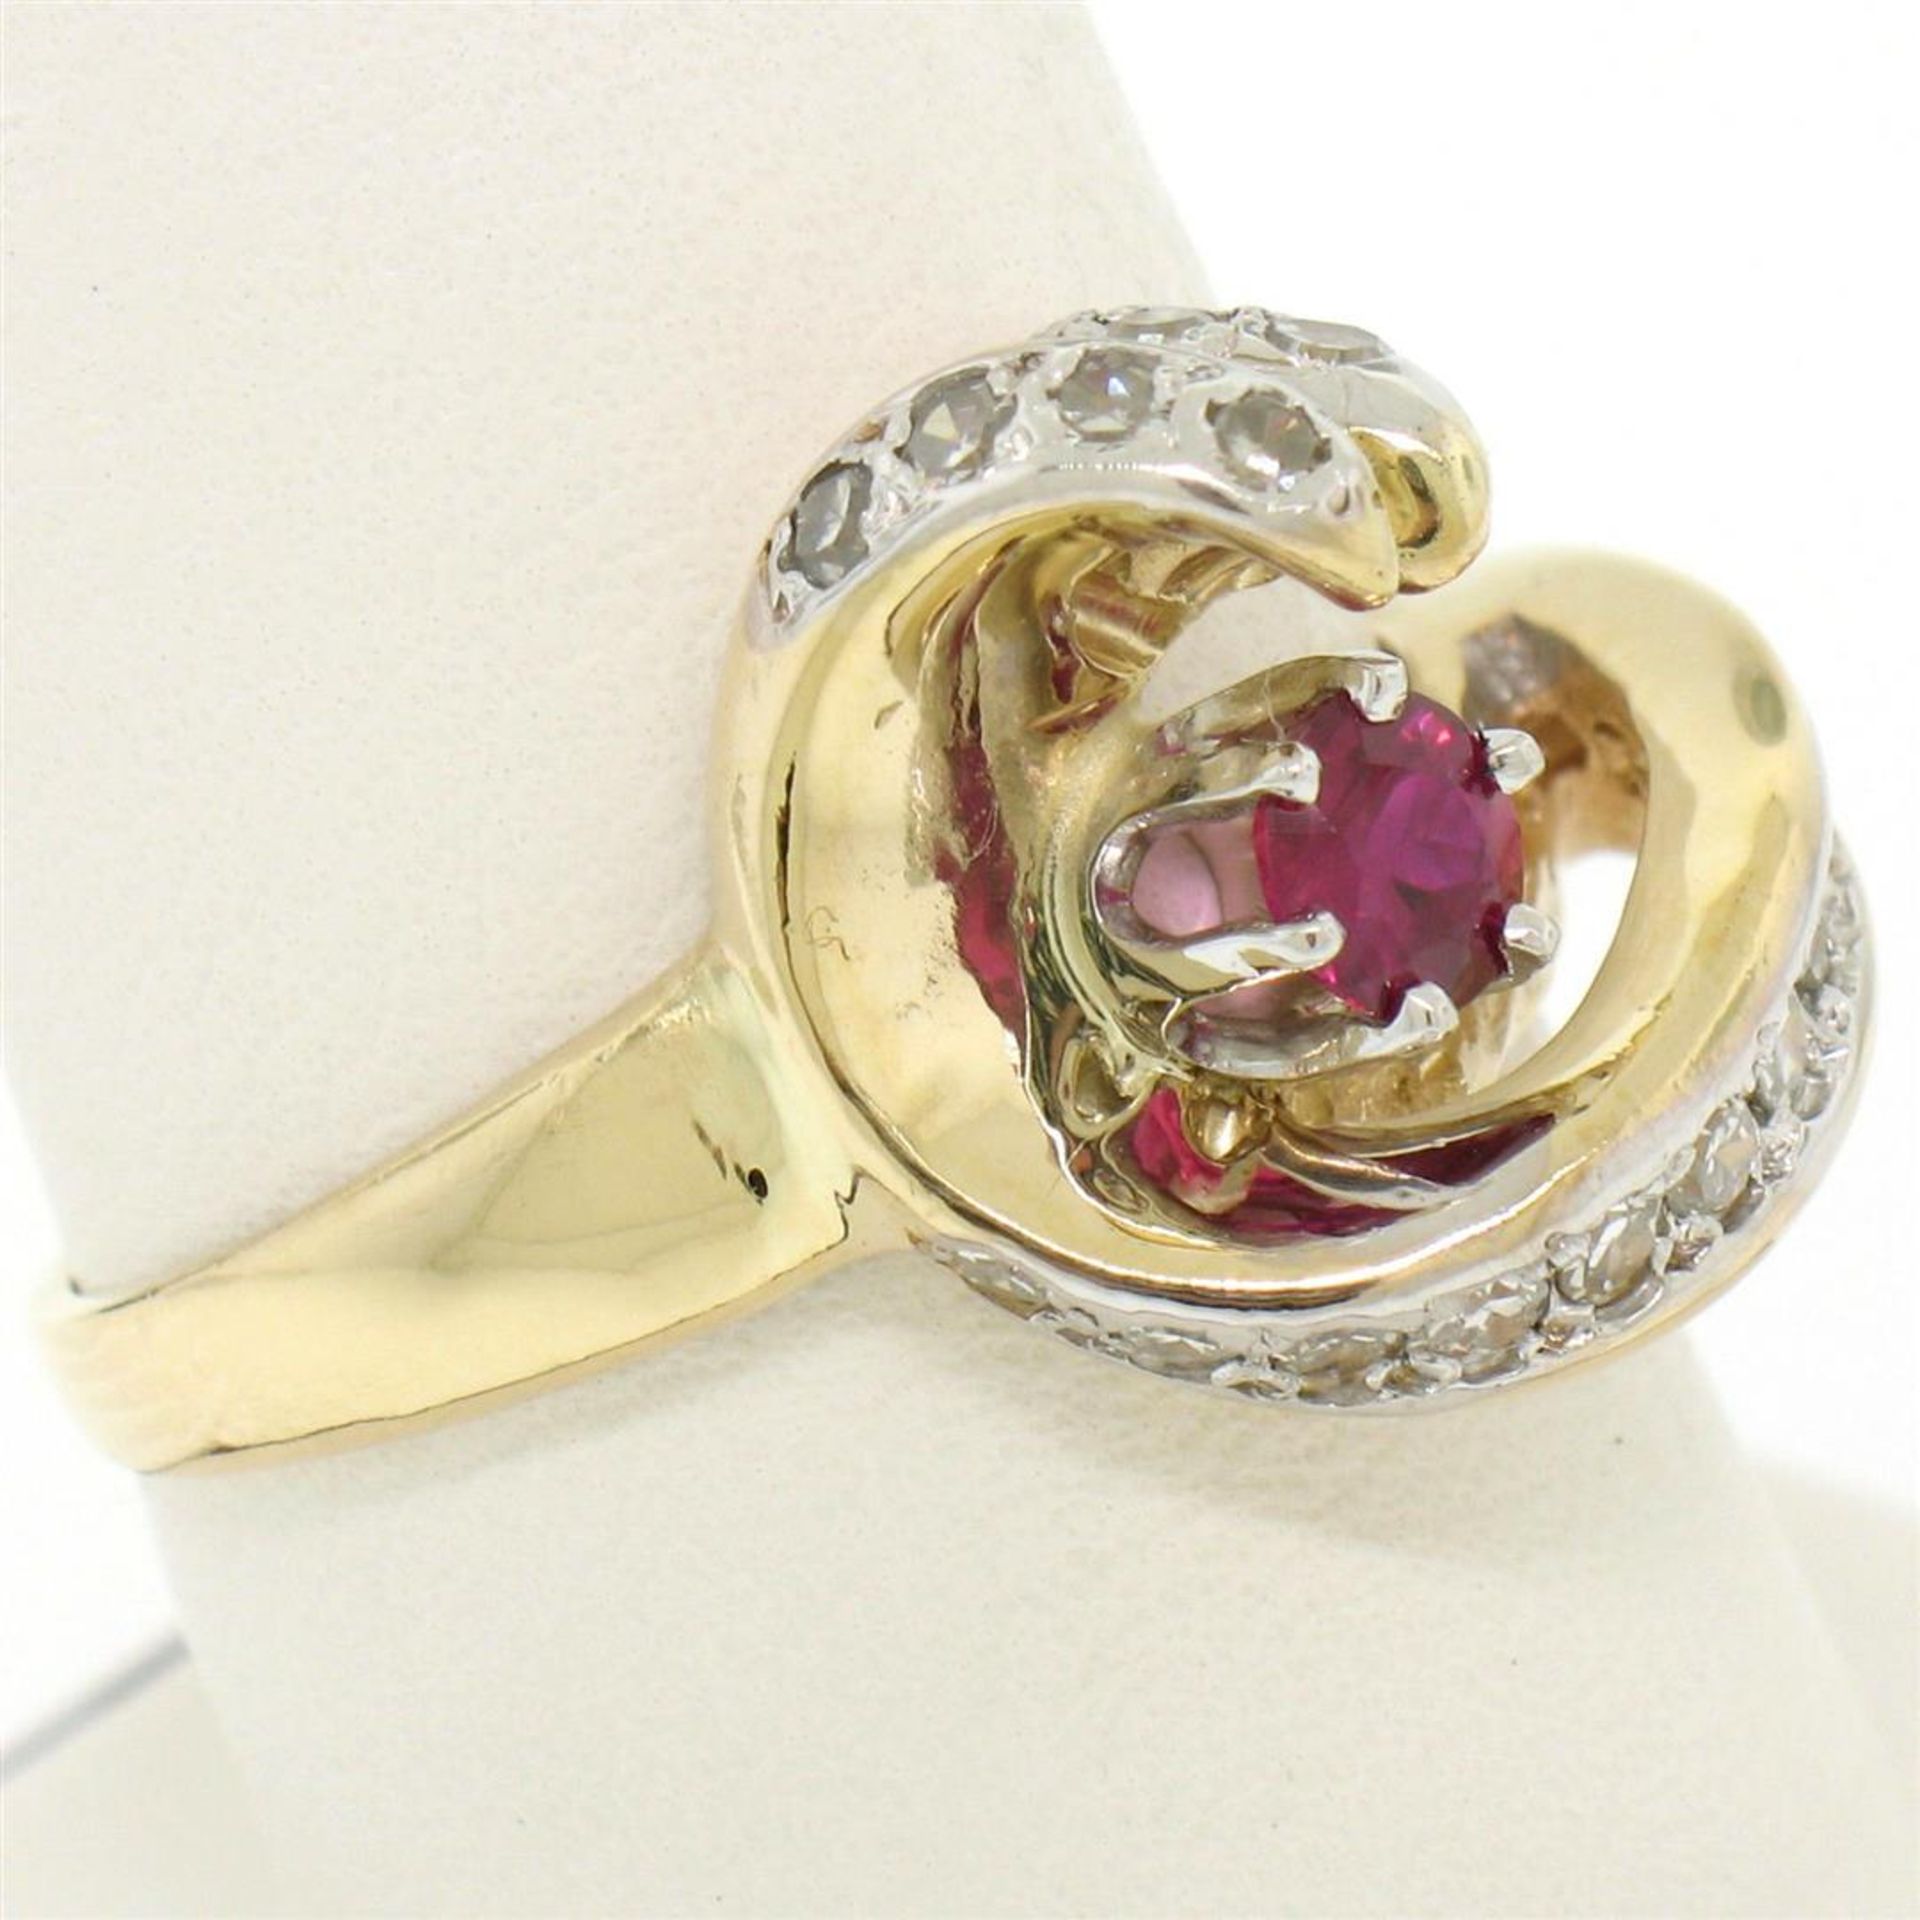 14k Yellow Gold .30 ct Round Blood Red Ruby Claw Cocktail Ring w/ Diamond Accent - Image 6 of 7